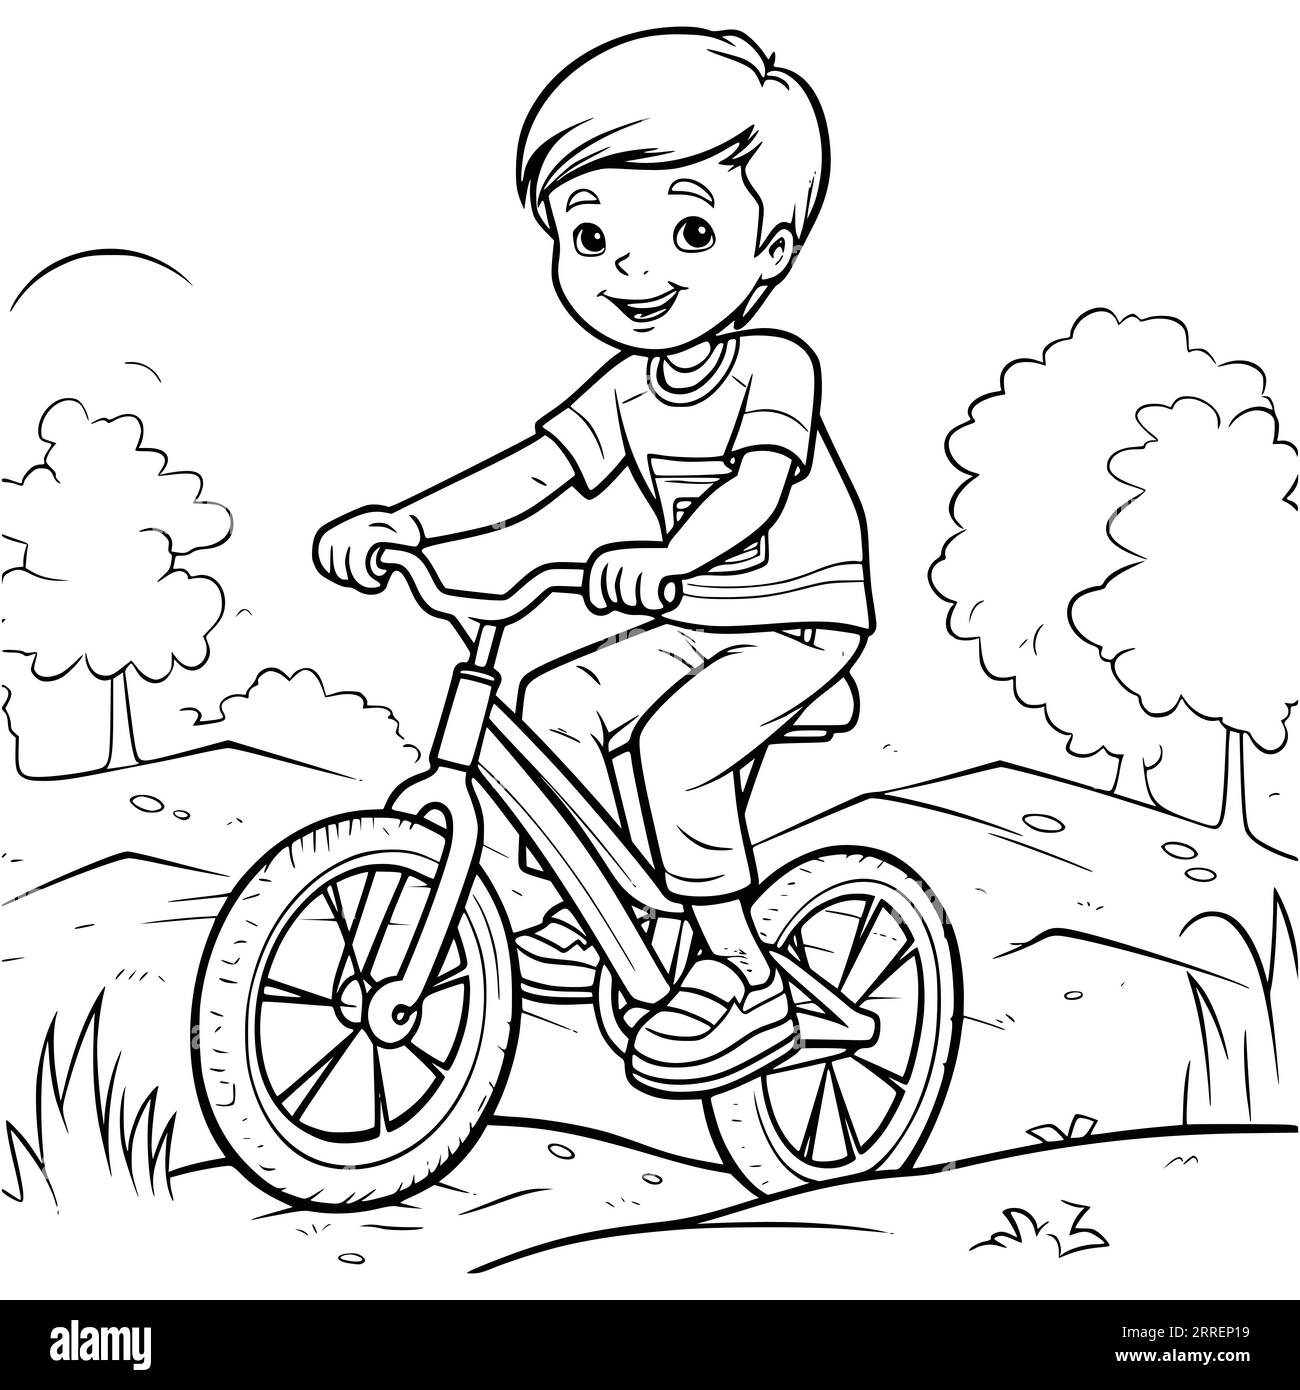 Boy Riding Bicycle Coloring Page for Kids Stock Vector